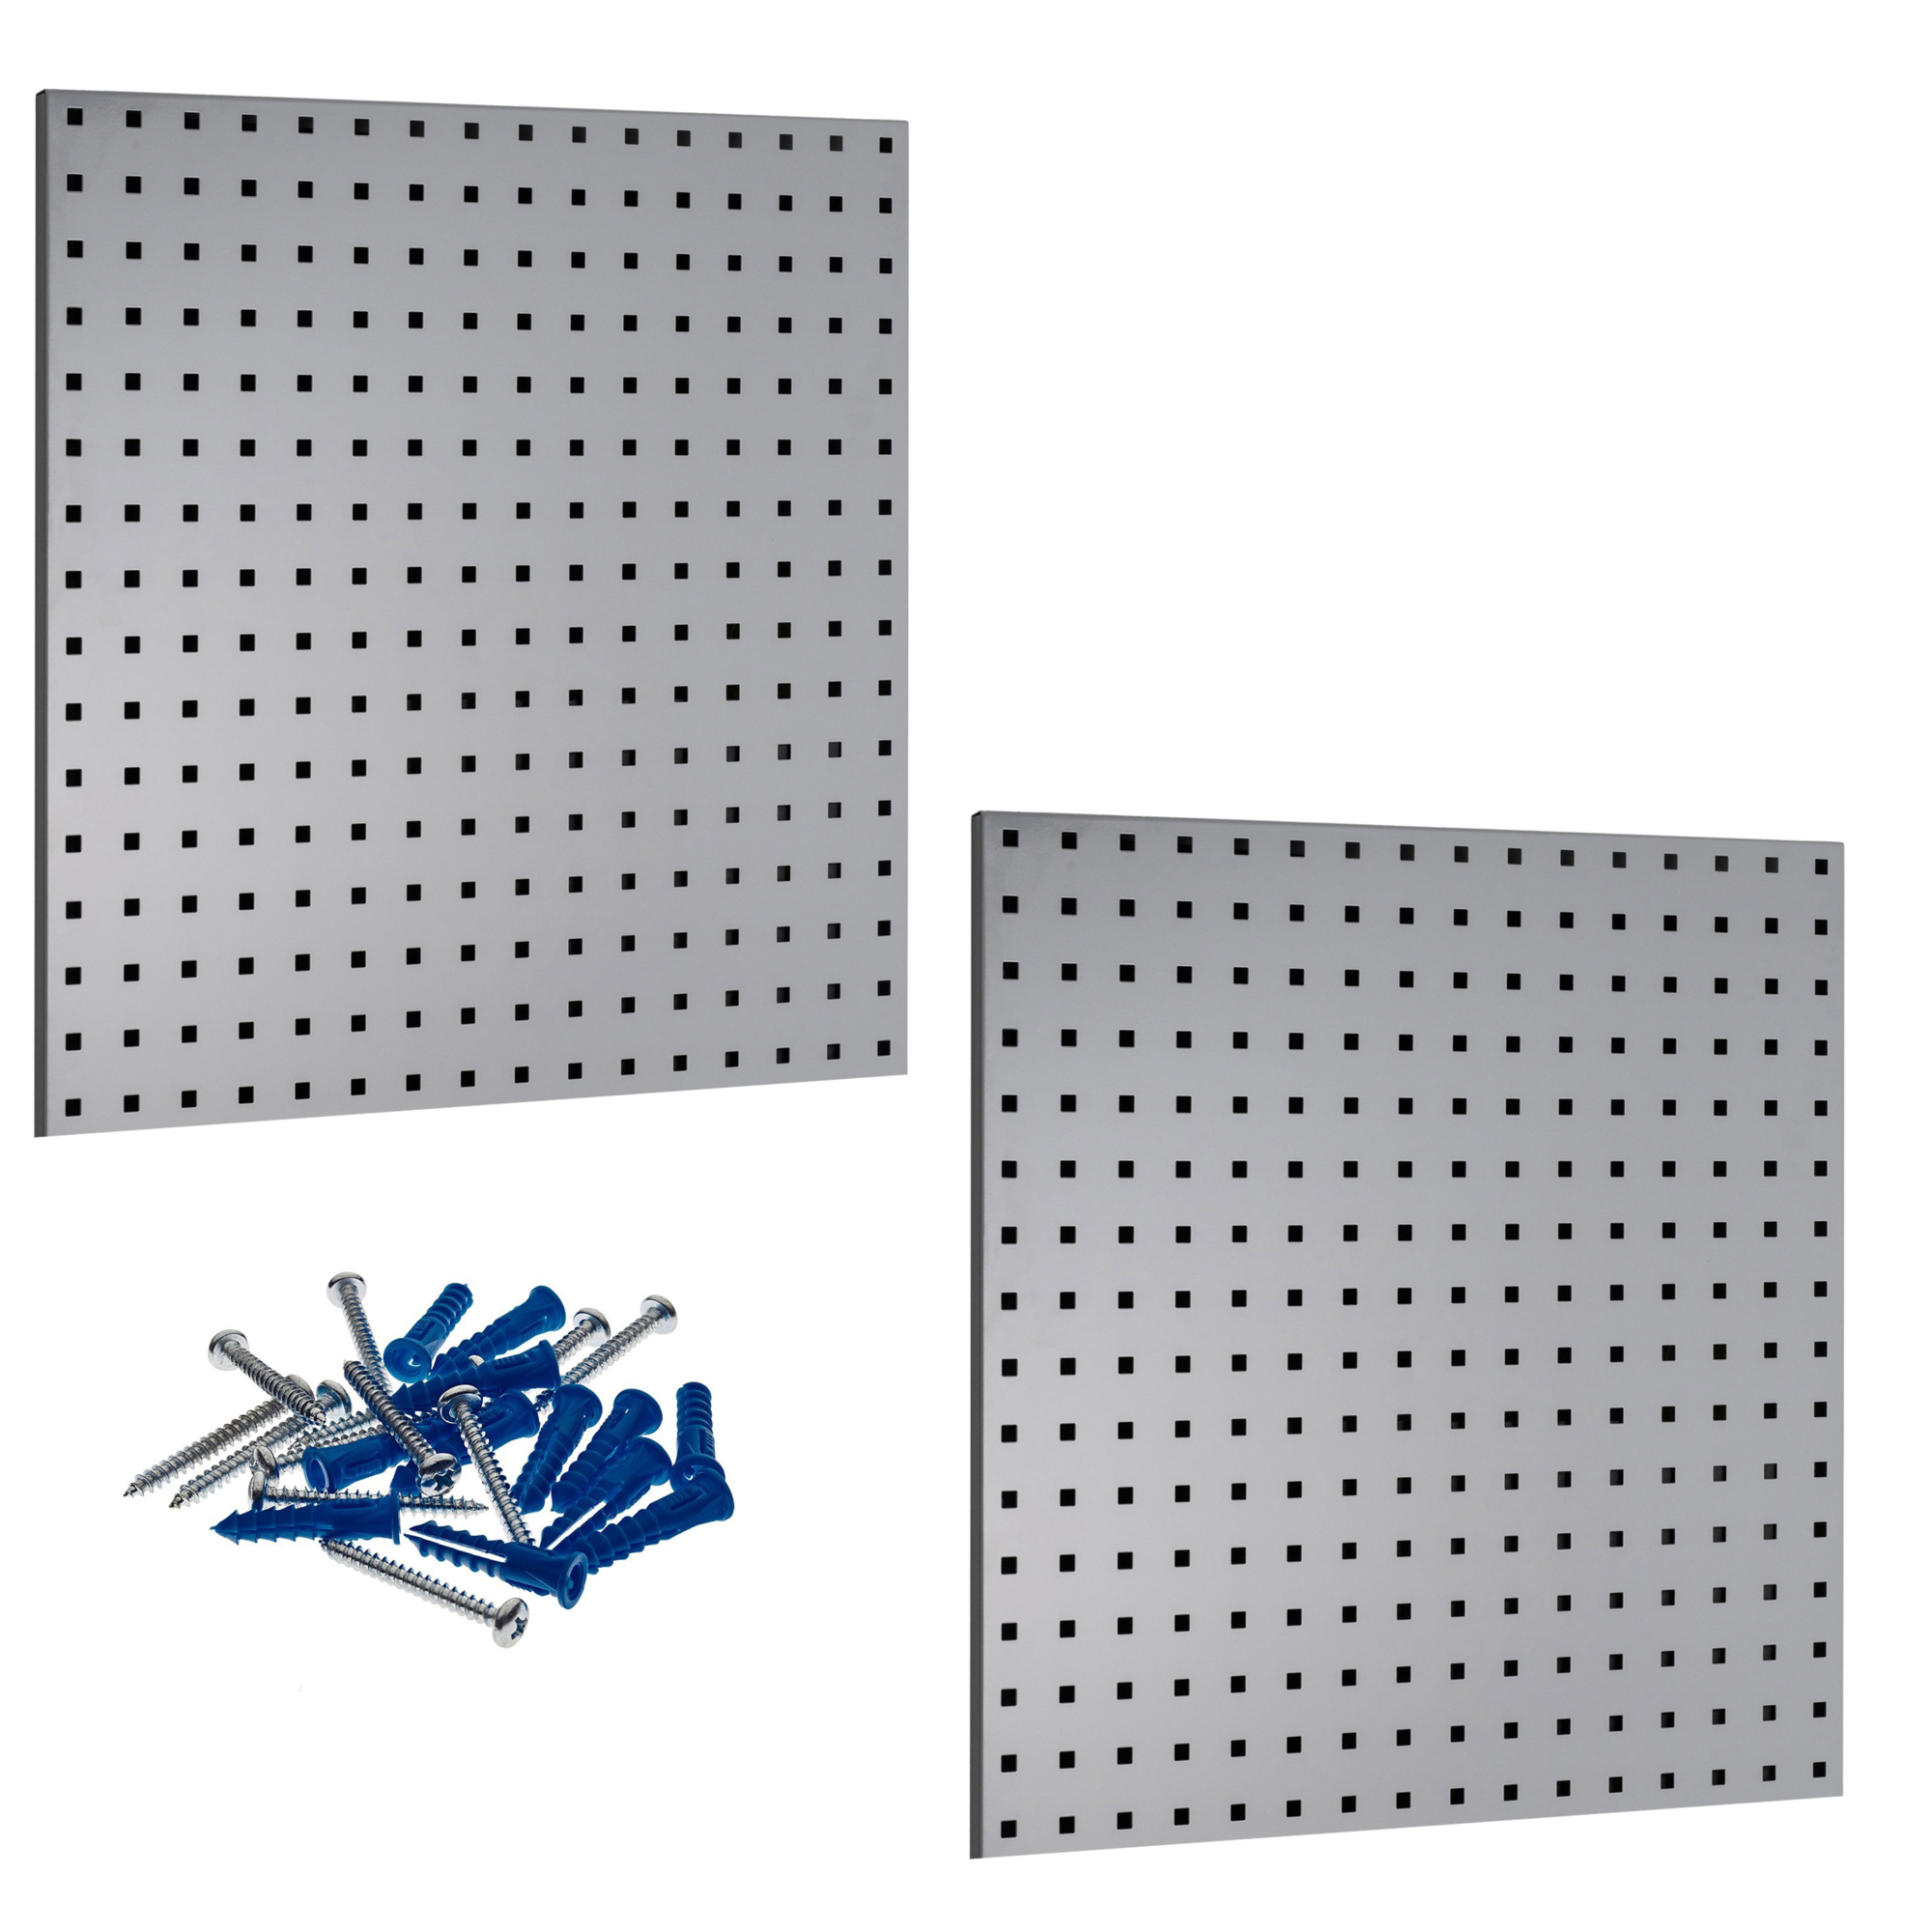 Triton Products, (2) 18-Gauge Steel Square Hole Pegboards, Capacity 300 lb, Length 24 in, Width 24 in, Model LB1-G